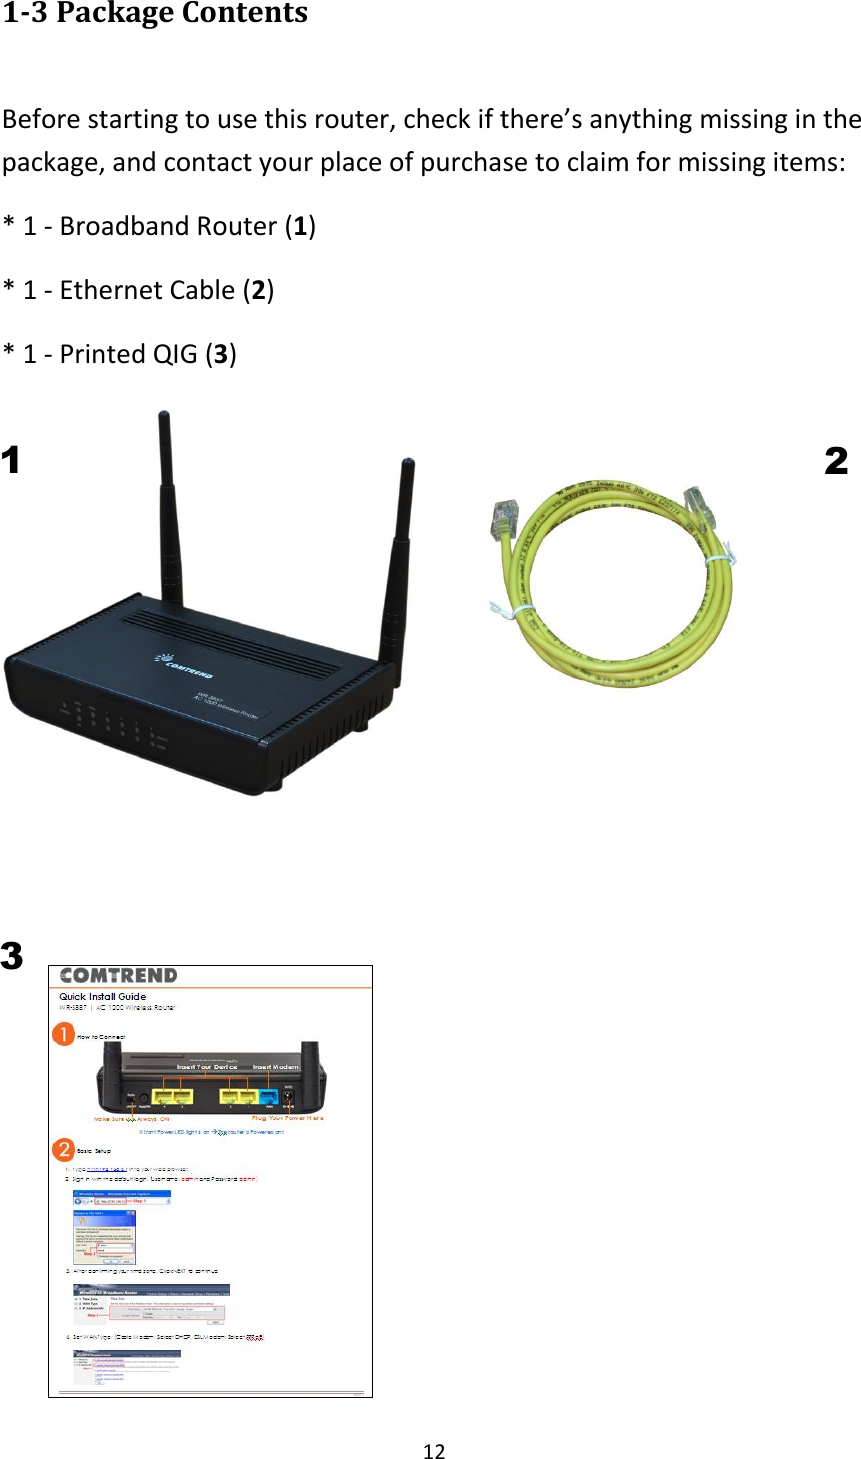 12 1-3 Package Contents  Before starting to use this router, check if there’s anything missing in the package, and contact your place of purchase to claim for missing items: * 1 - Broadband Router (1)   * 1 - Ethernet Cable (2) * 1 - Printed QIG (3)                                    2 1 3 